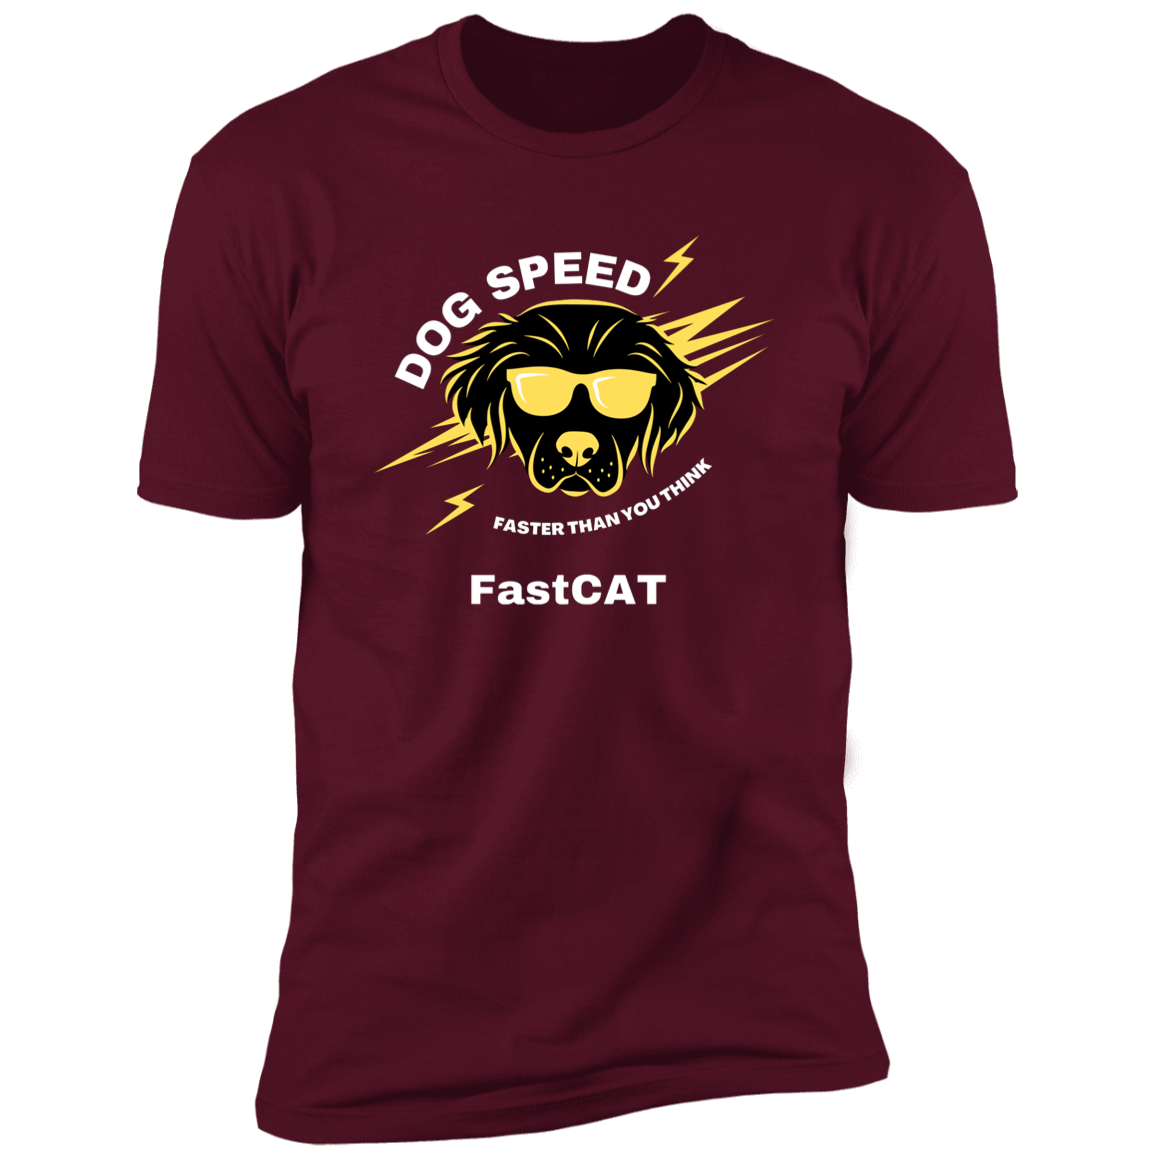 Dog Speed Faster Than You Think FastCAT T-shirt, FastCAT shirt dog shirt for humans, in maroon. 